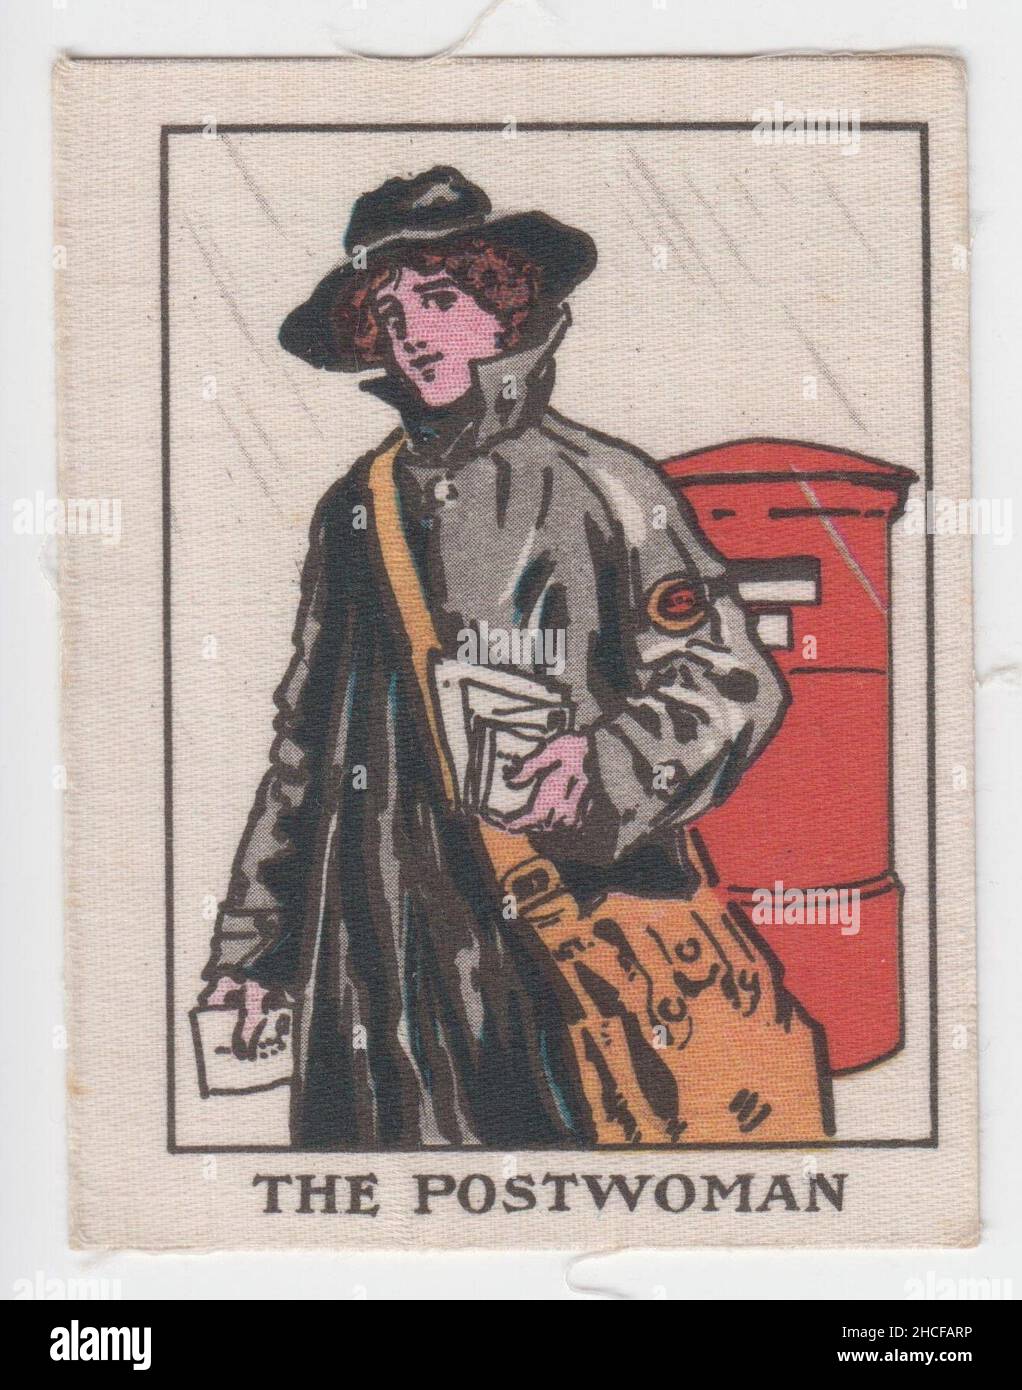 'The postwoman': One of a series of silk cards portraying First World War women workers given away by the weekly magazine 'The Happy Home' as 'charming war souvenirs'. The image shows a postal worker carrying a mail bag and letters, standing in front of a red post box Stock Photo